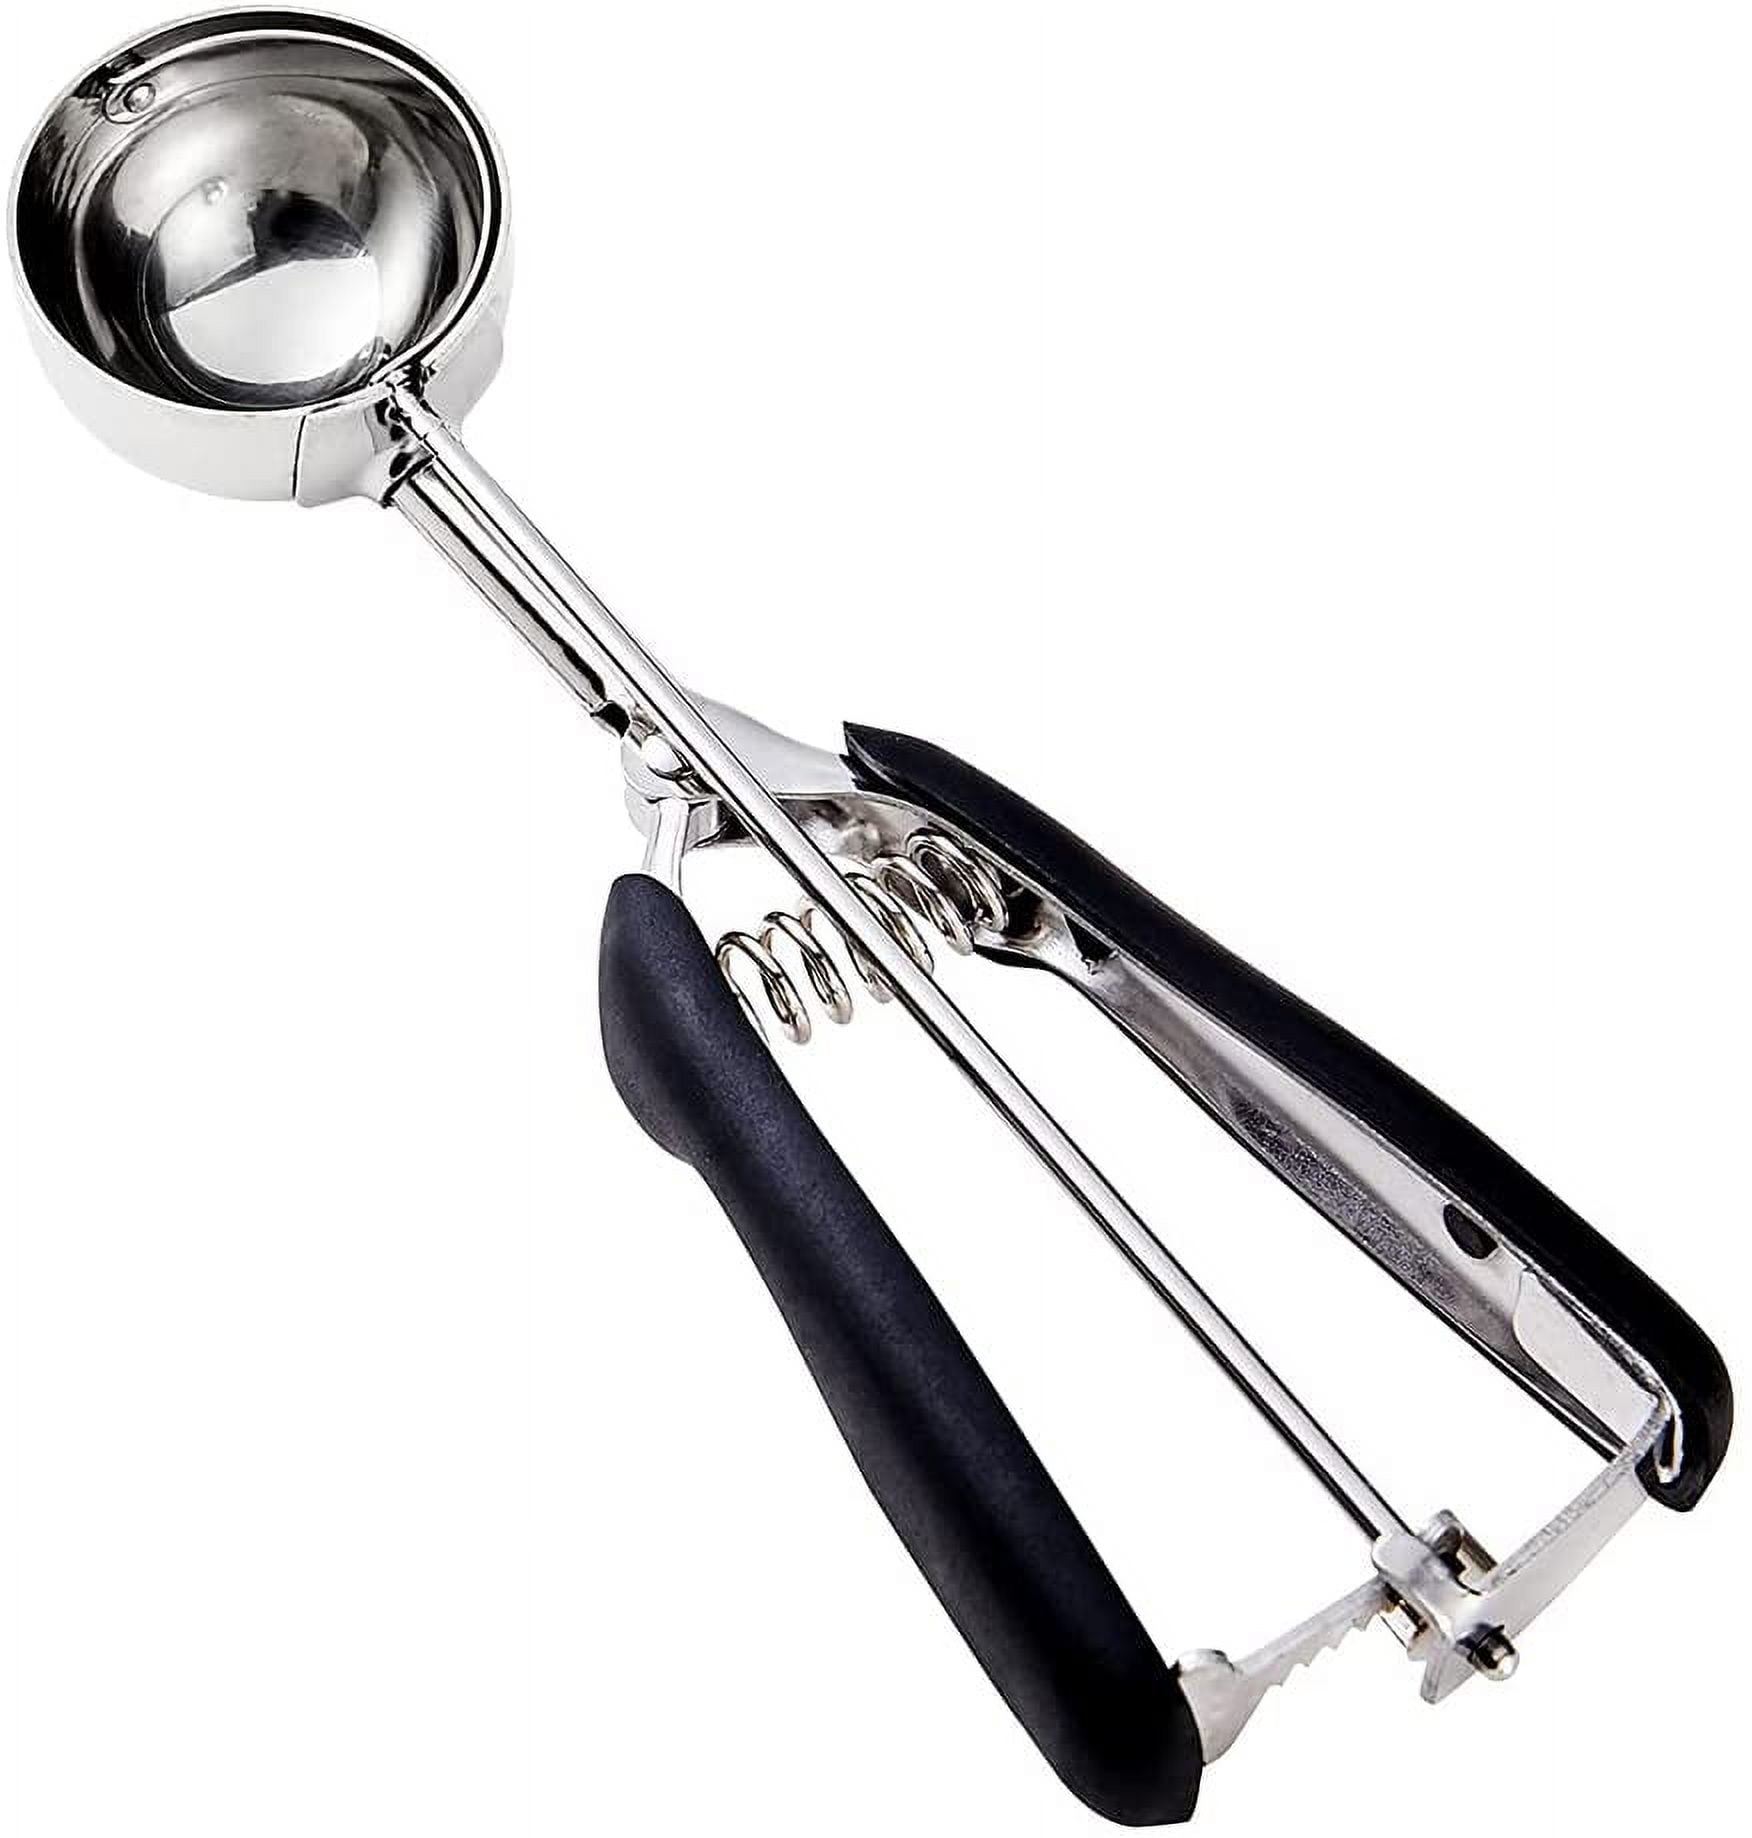 Large Cookie Scoop. 3 Tbsp Cookie Scoop for Baking, Cookie Dough Scoop,  Cupcake Scoop, 2 3/32 inches / 53 mm Ball, 18/8 Stainless Steel, Secondary